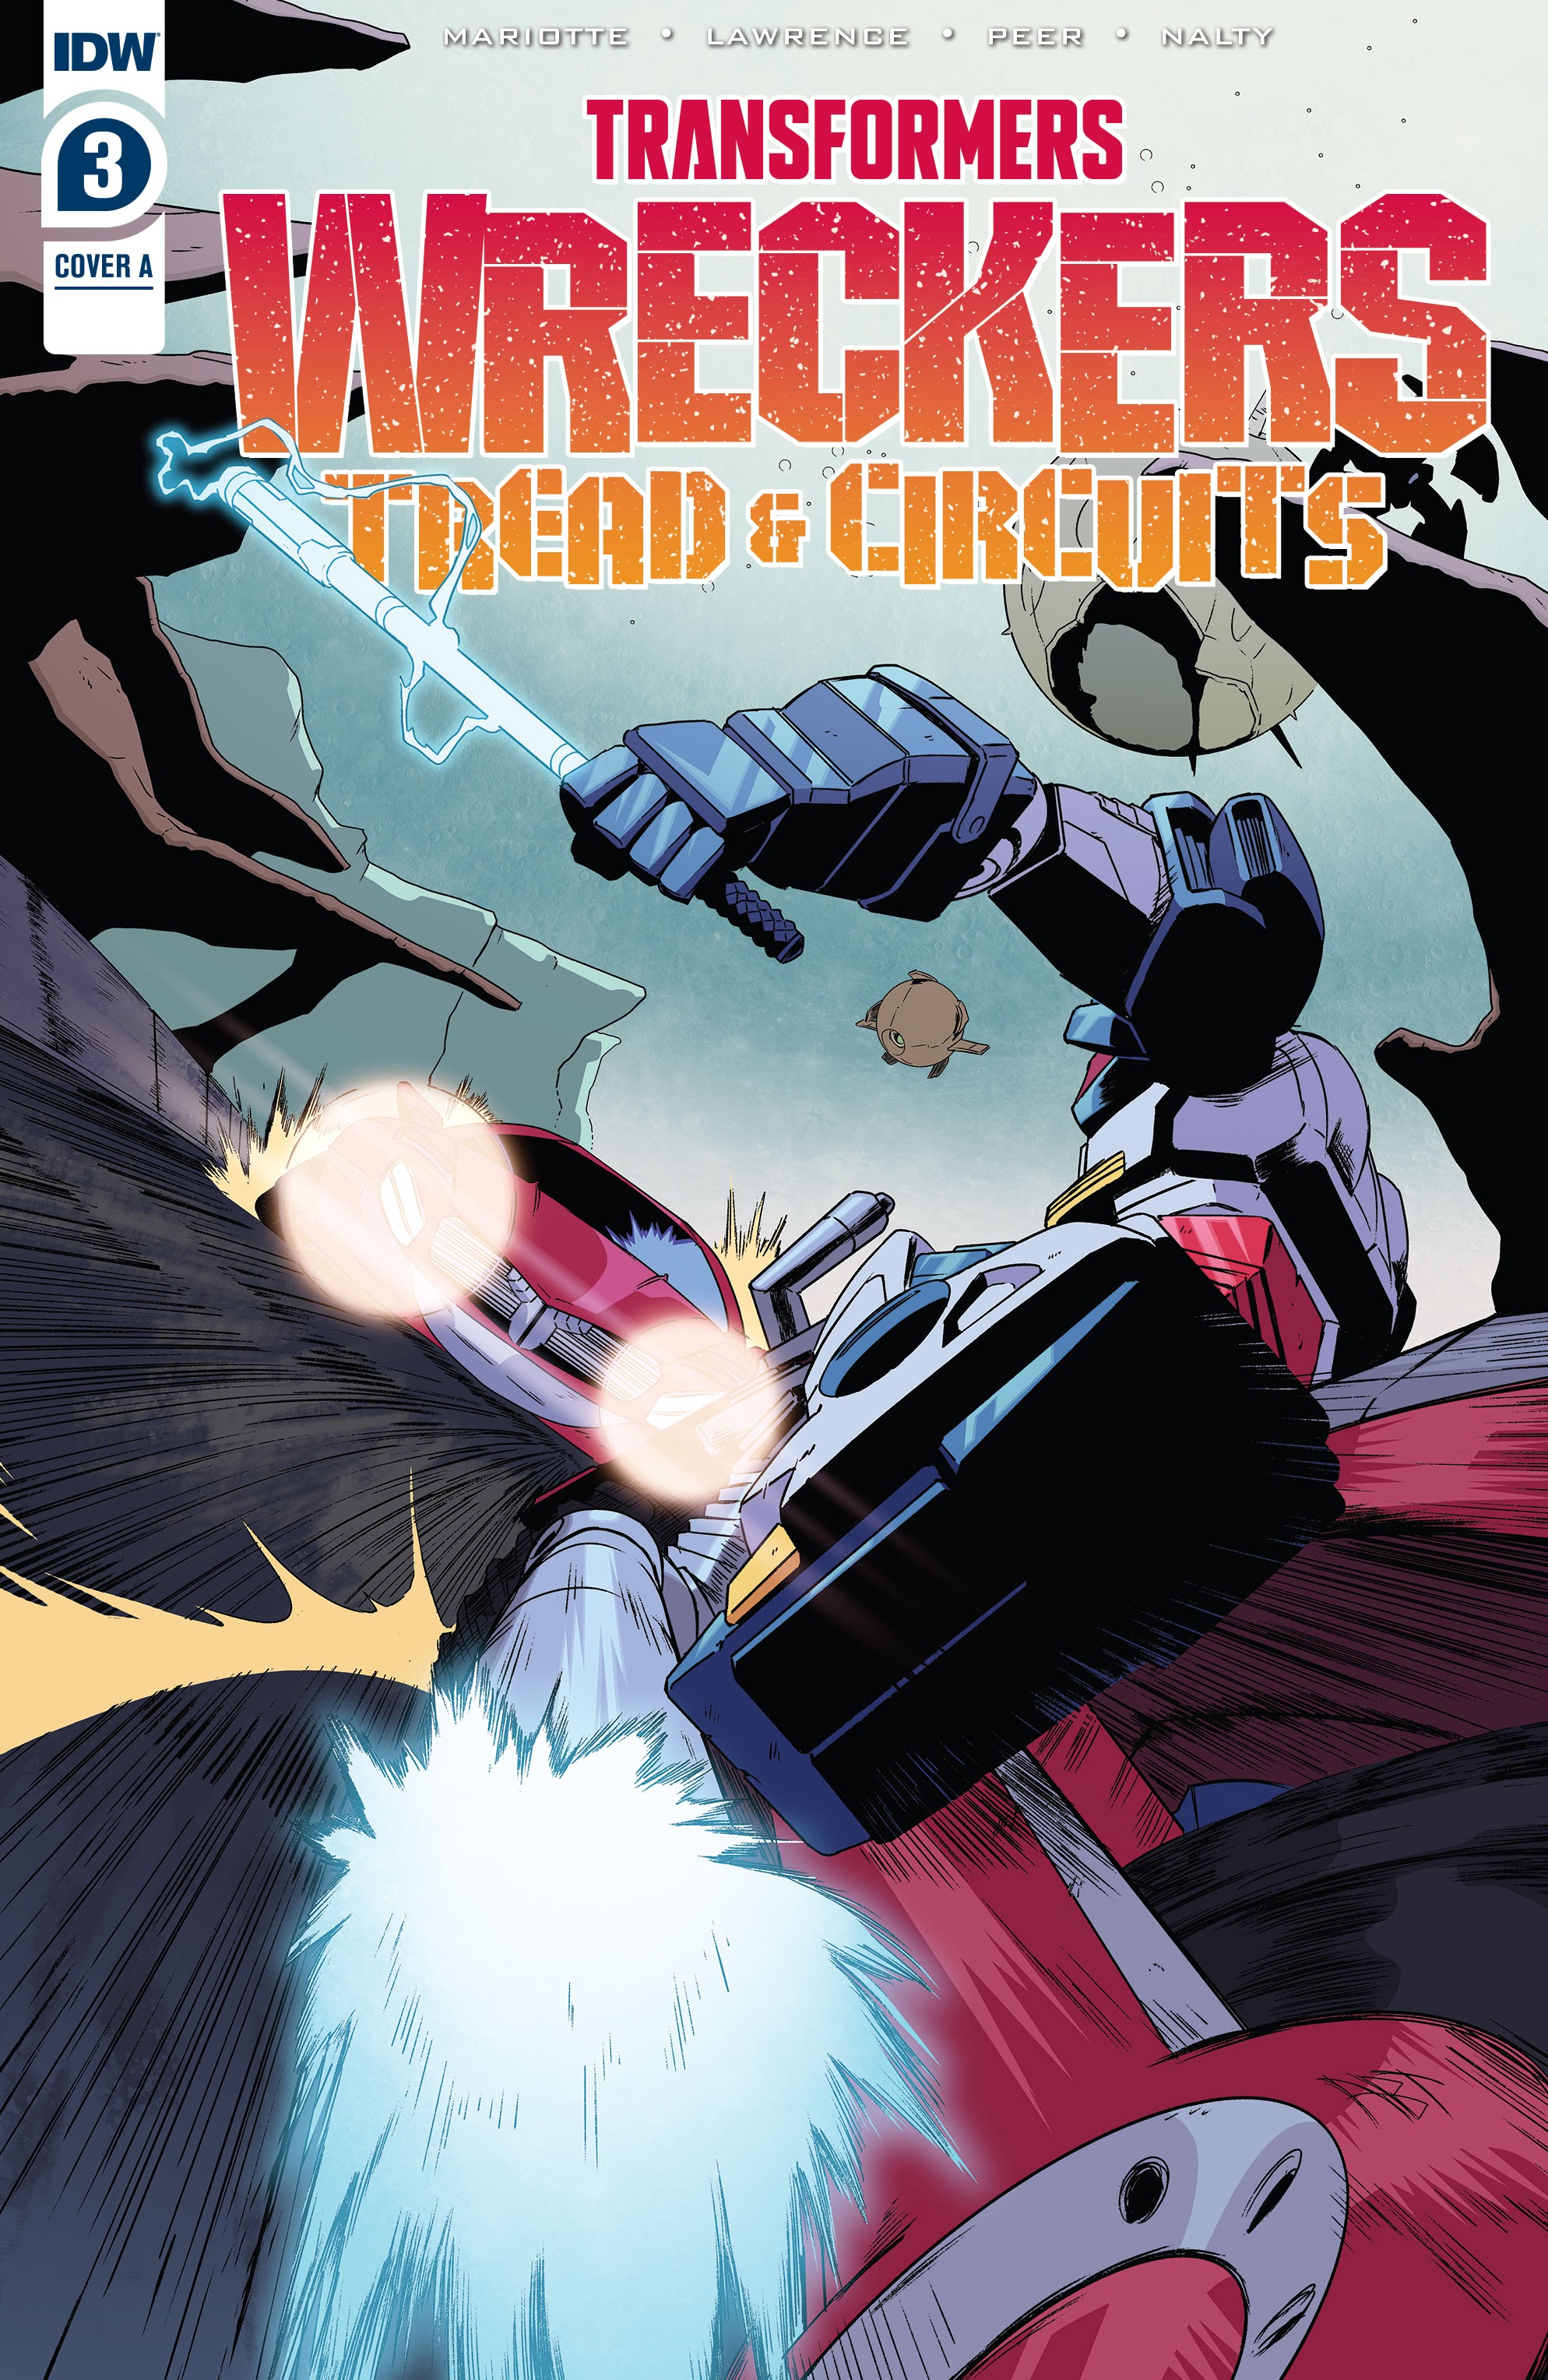 Read online Transformers: Wreckers-Tread and Circuits comic -  Issue #3 - 1